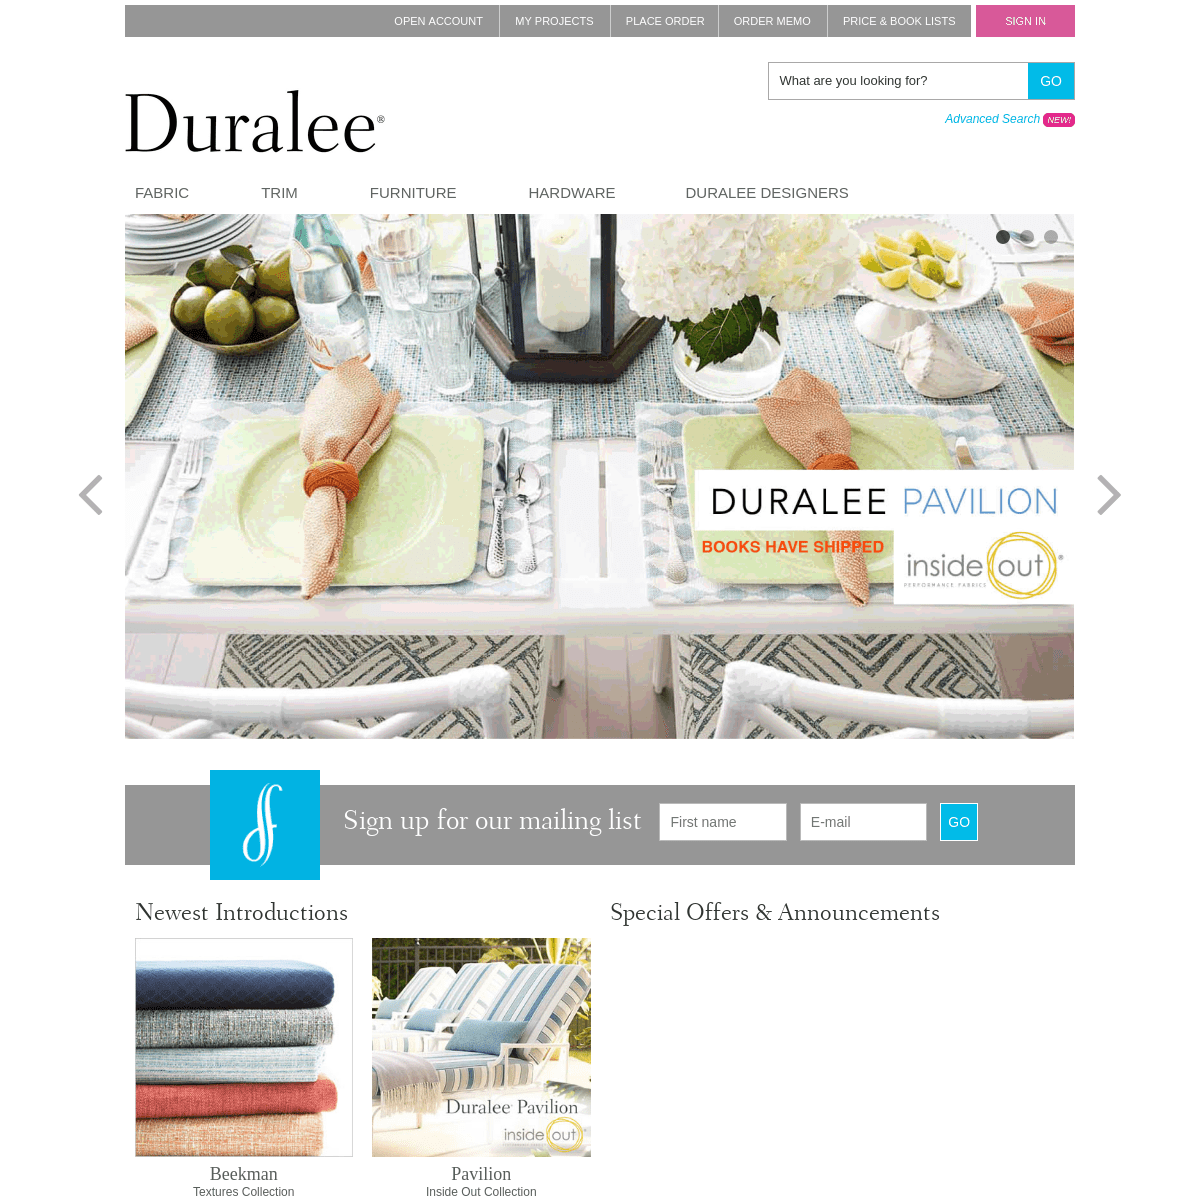 A complete backup of duralee.com